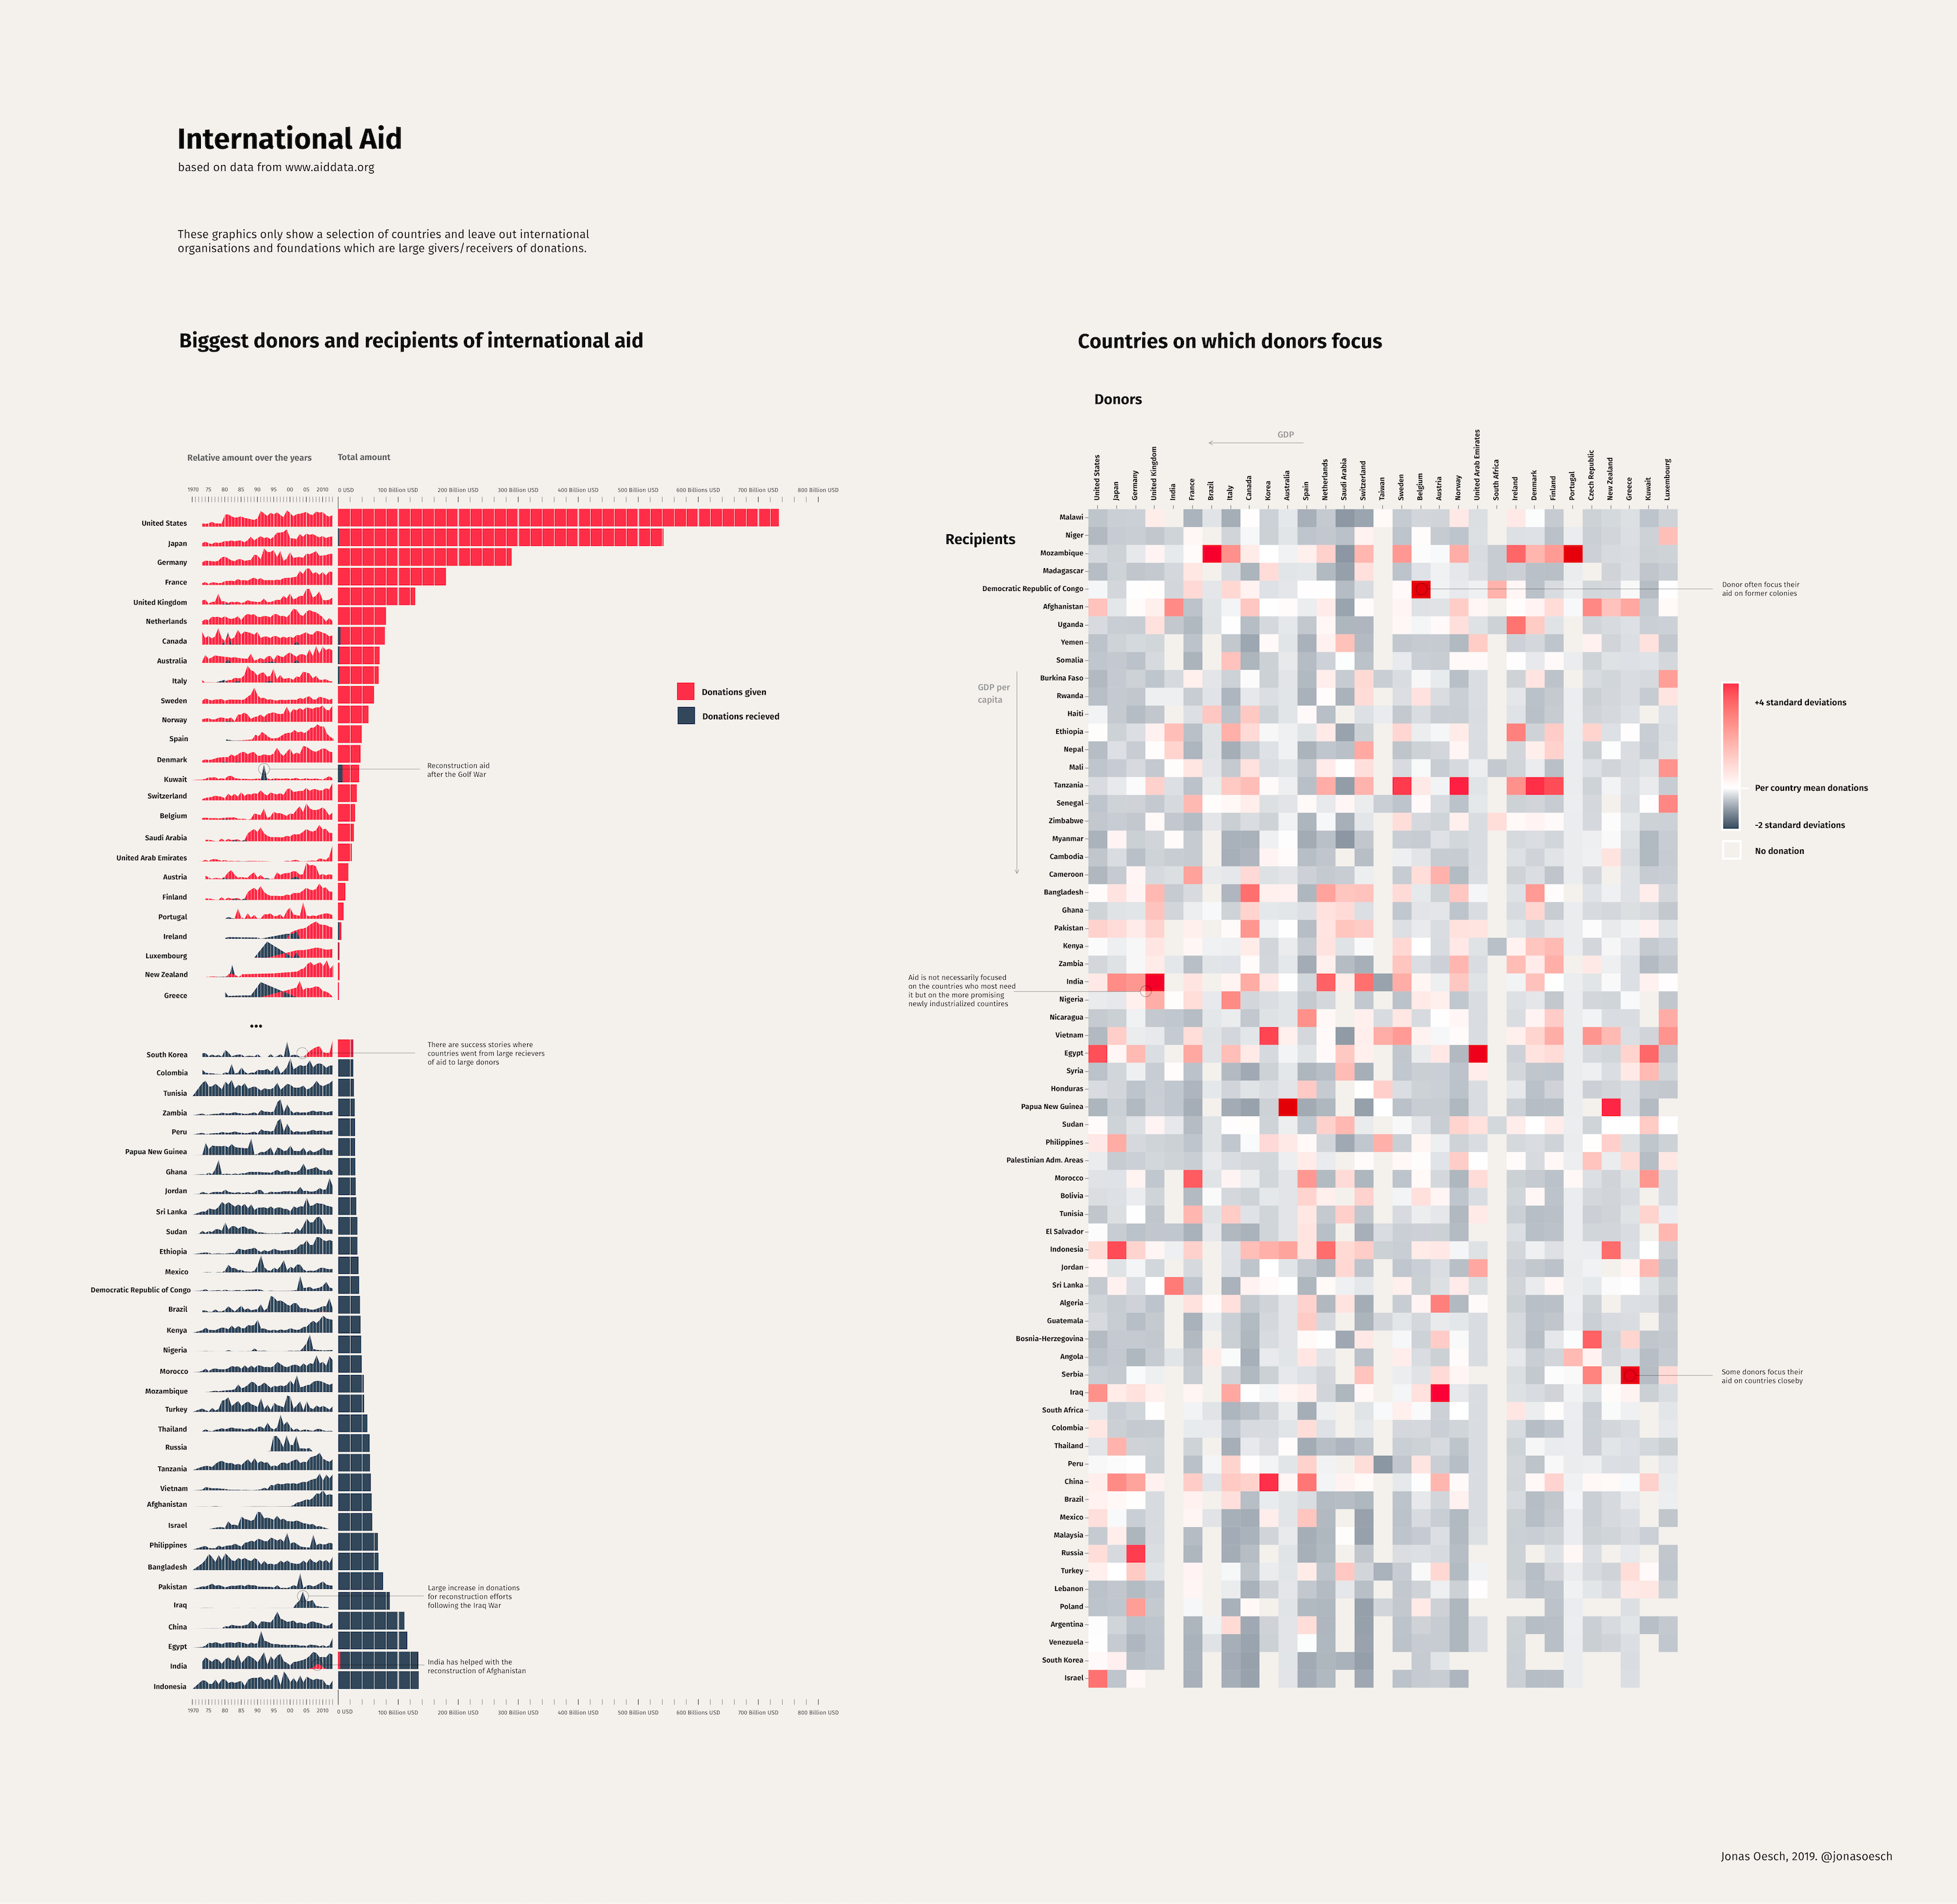 An explorative data visualization showing patterns in the flow of international aid money